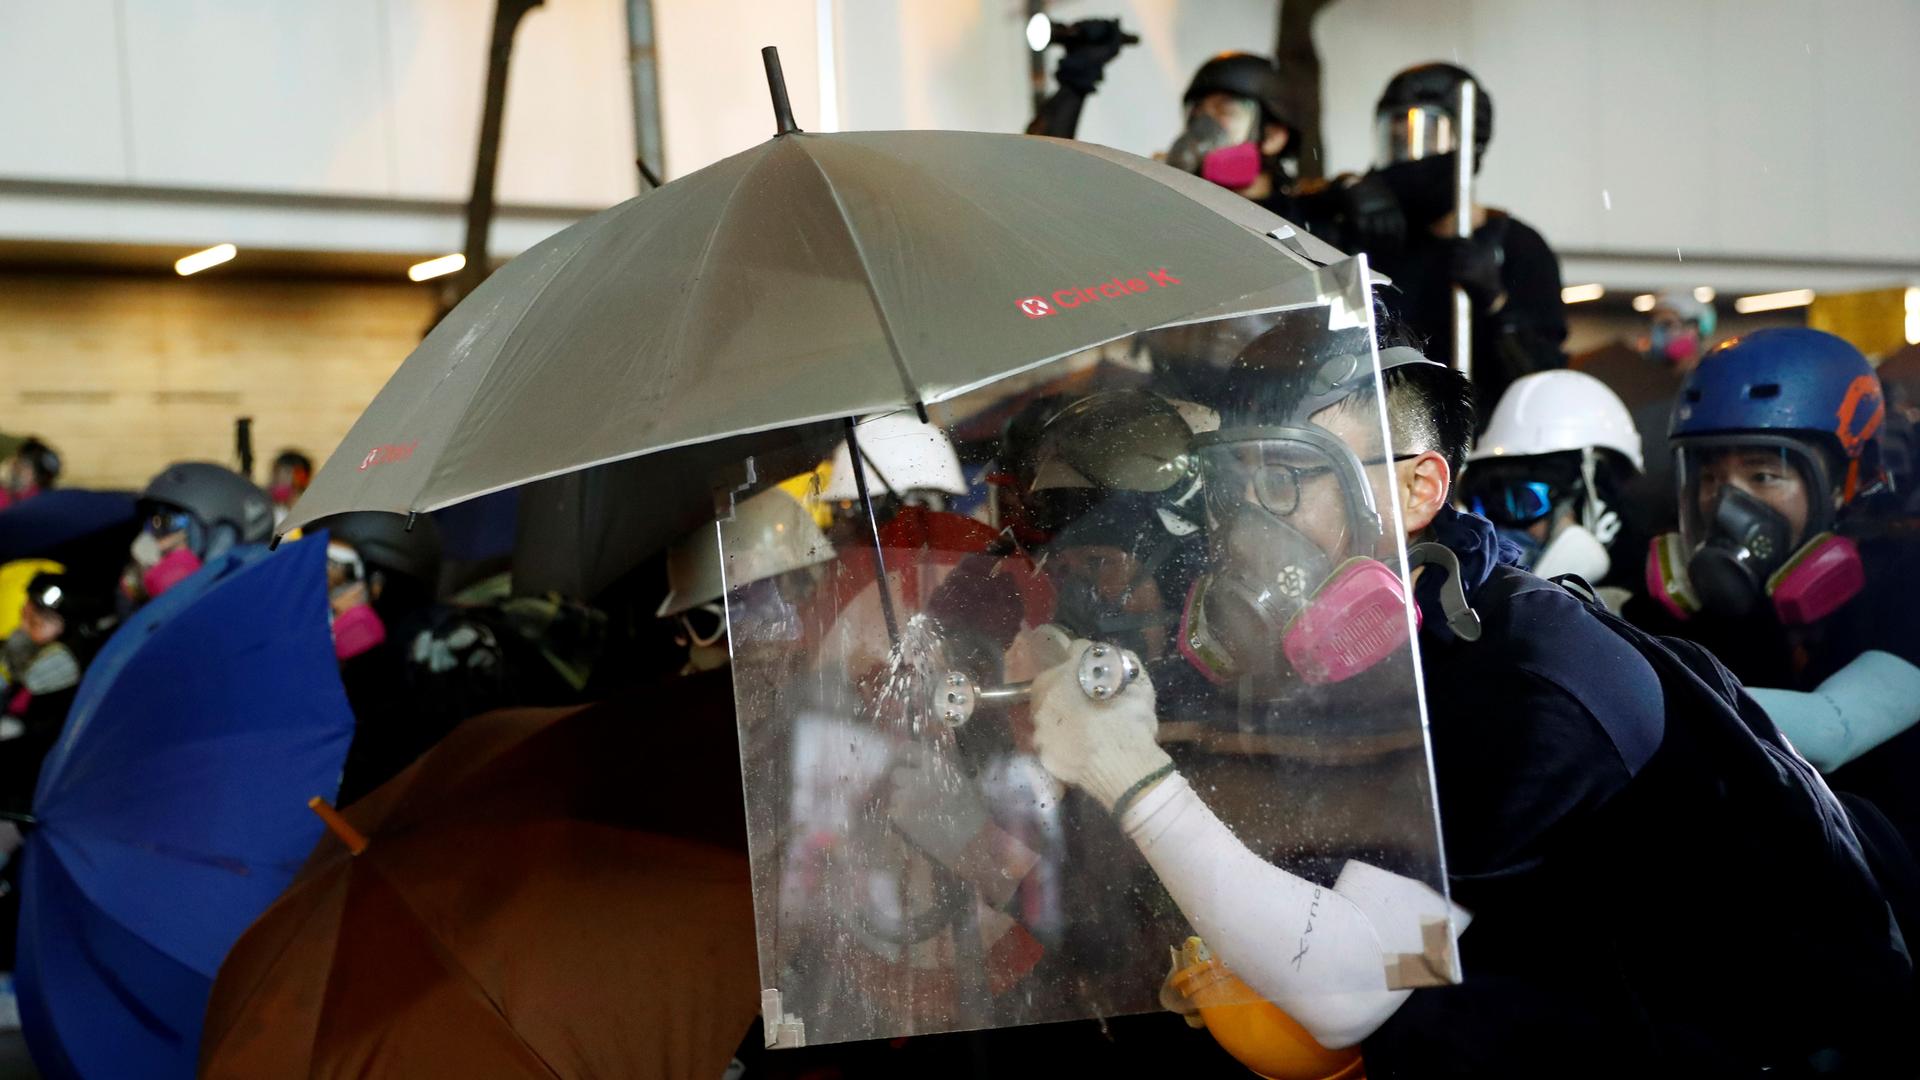 A demonstrator uses a makeshift shield to take cover during a protest in Hong Kong